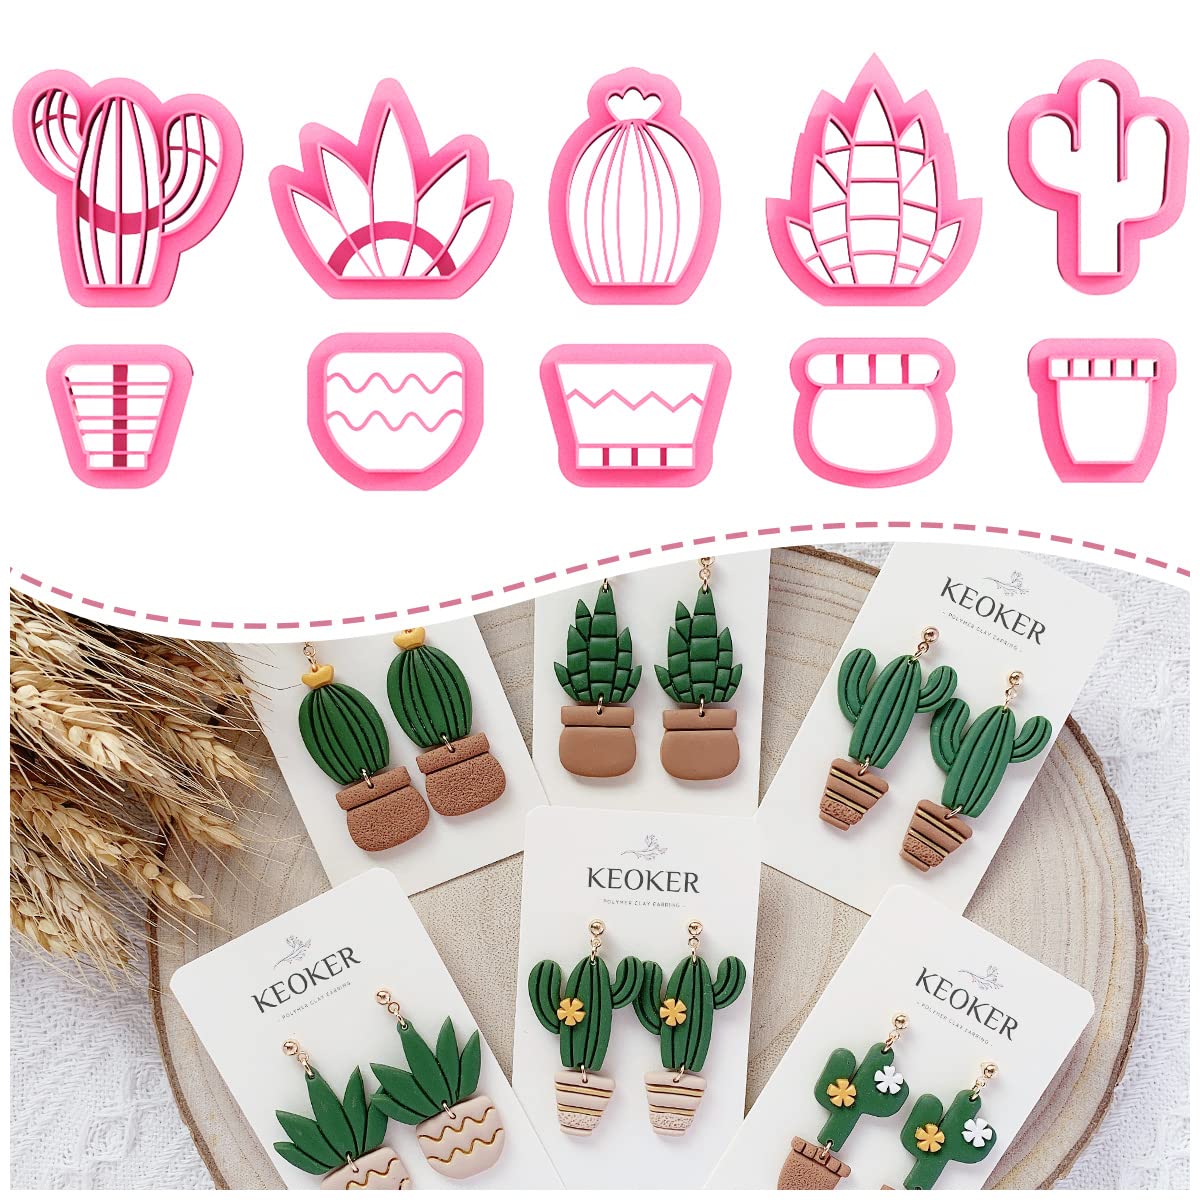 Keoker Clay Cutters For Polymer Clay Jewelry, Cactus Polymer Clay Cutters  For Earrings Jewelry Making, 10 Shapes Potted Plant Cl